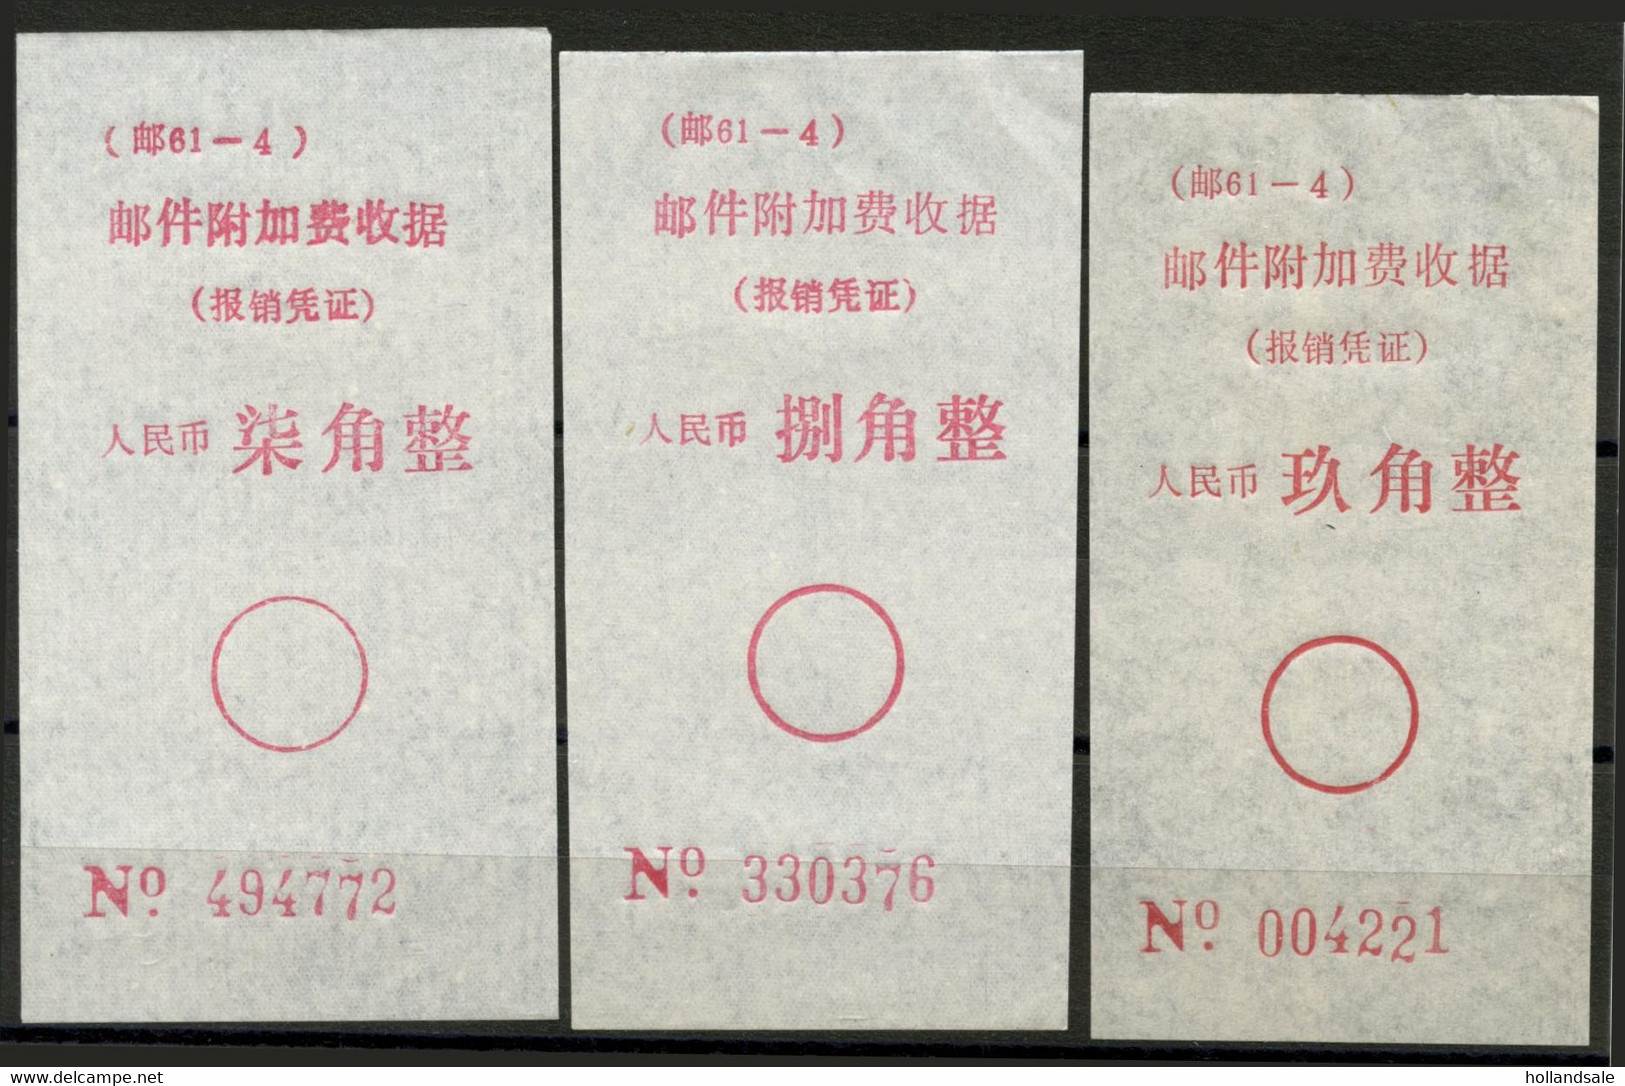 CHINA PRC - ADDED CHARGE LABELS -  70f - 90f Labels Of Huaying City, Sichuan Prov. D&O # 24-0555/24-0557. - Portomarken